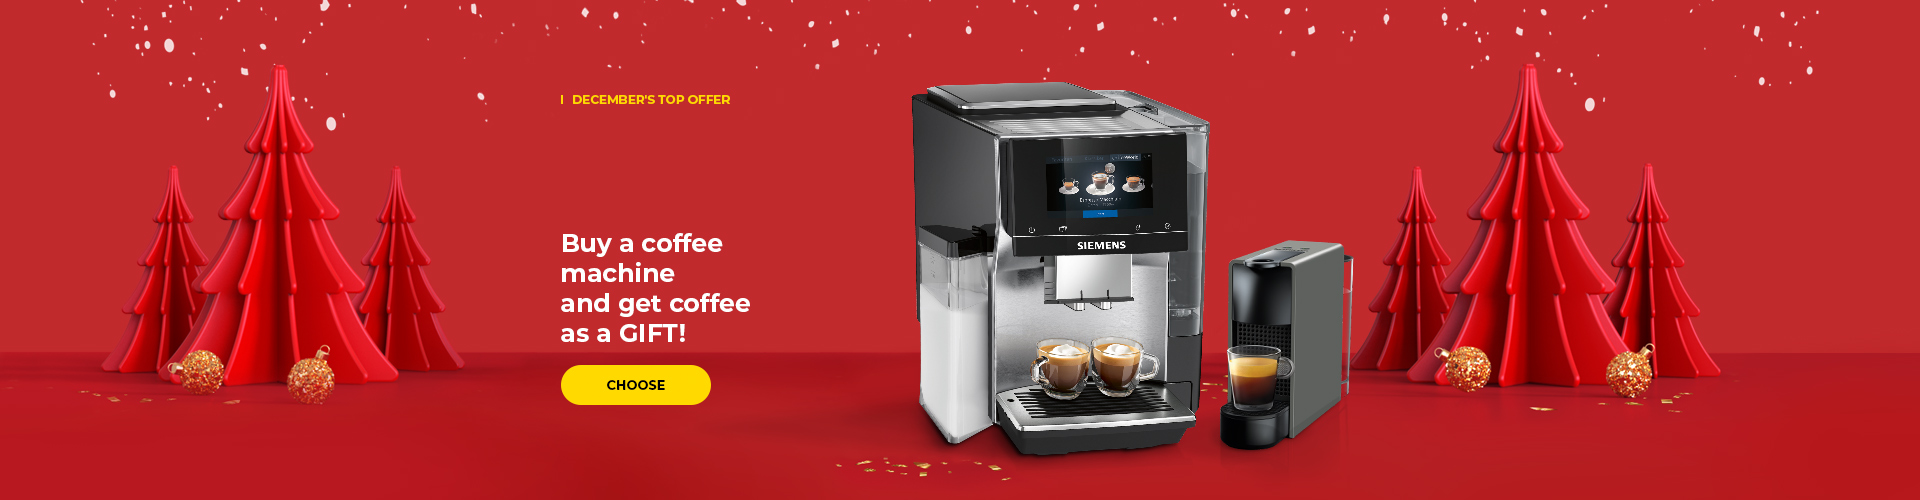 Buy a coffee machine and get coffee as a gift!